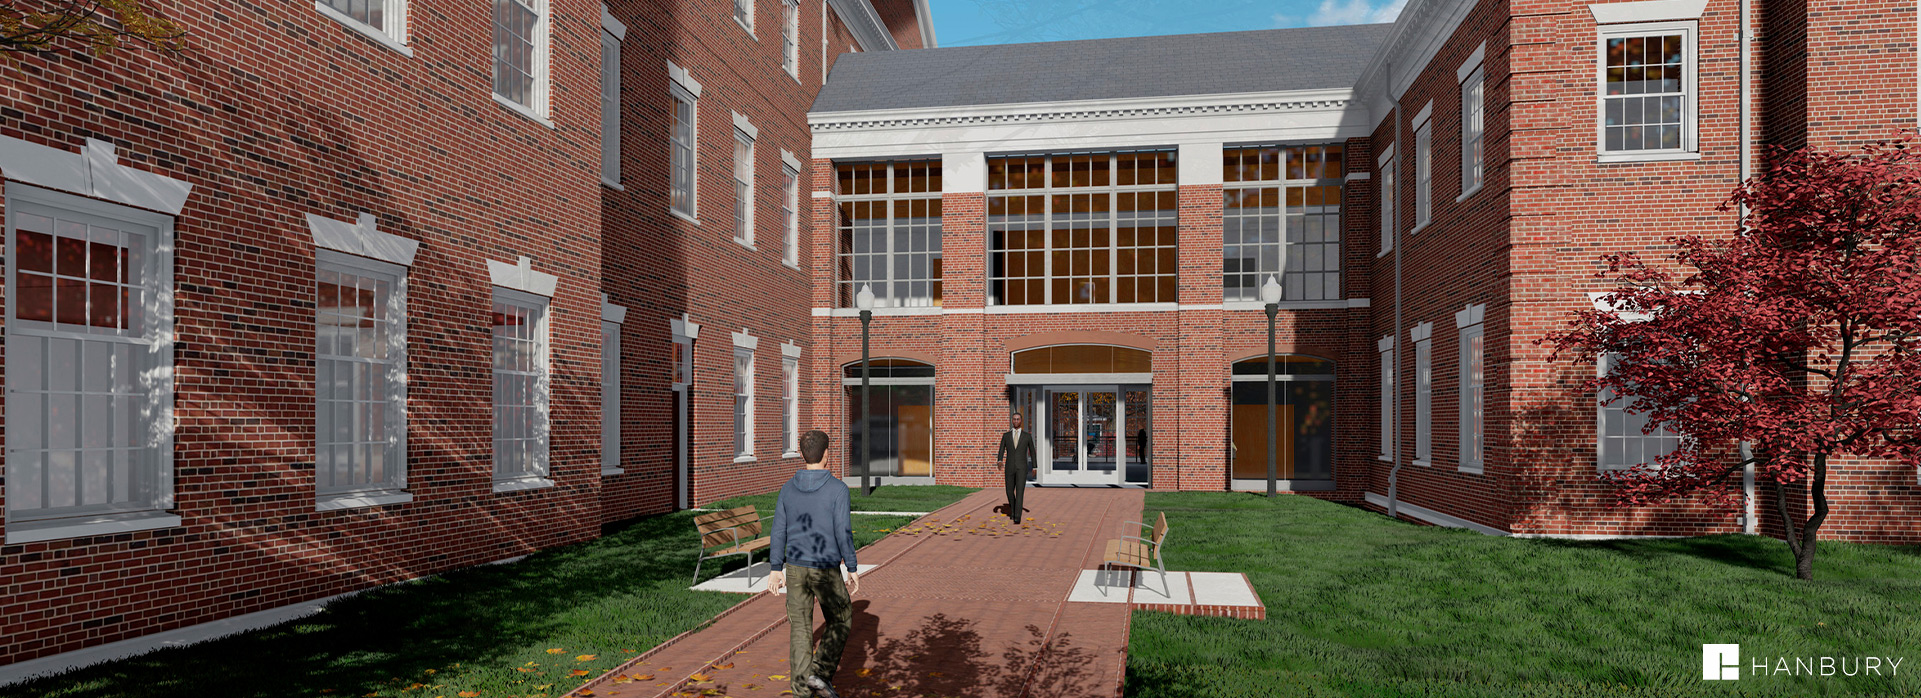 35 North Provides Cost Estimating Services to Hampden-Sydney College for their New Science Building in Hampden-Sydney, VA